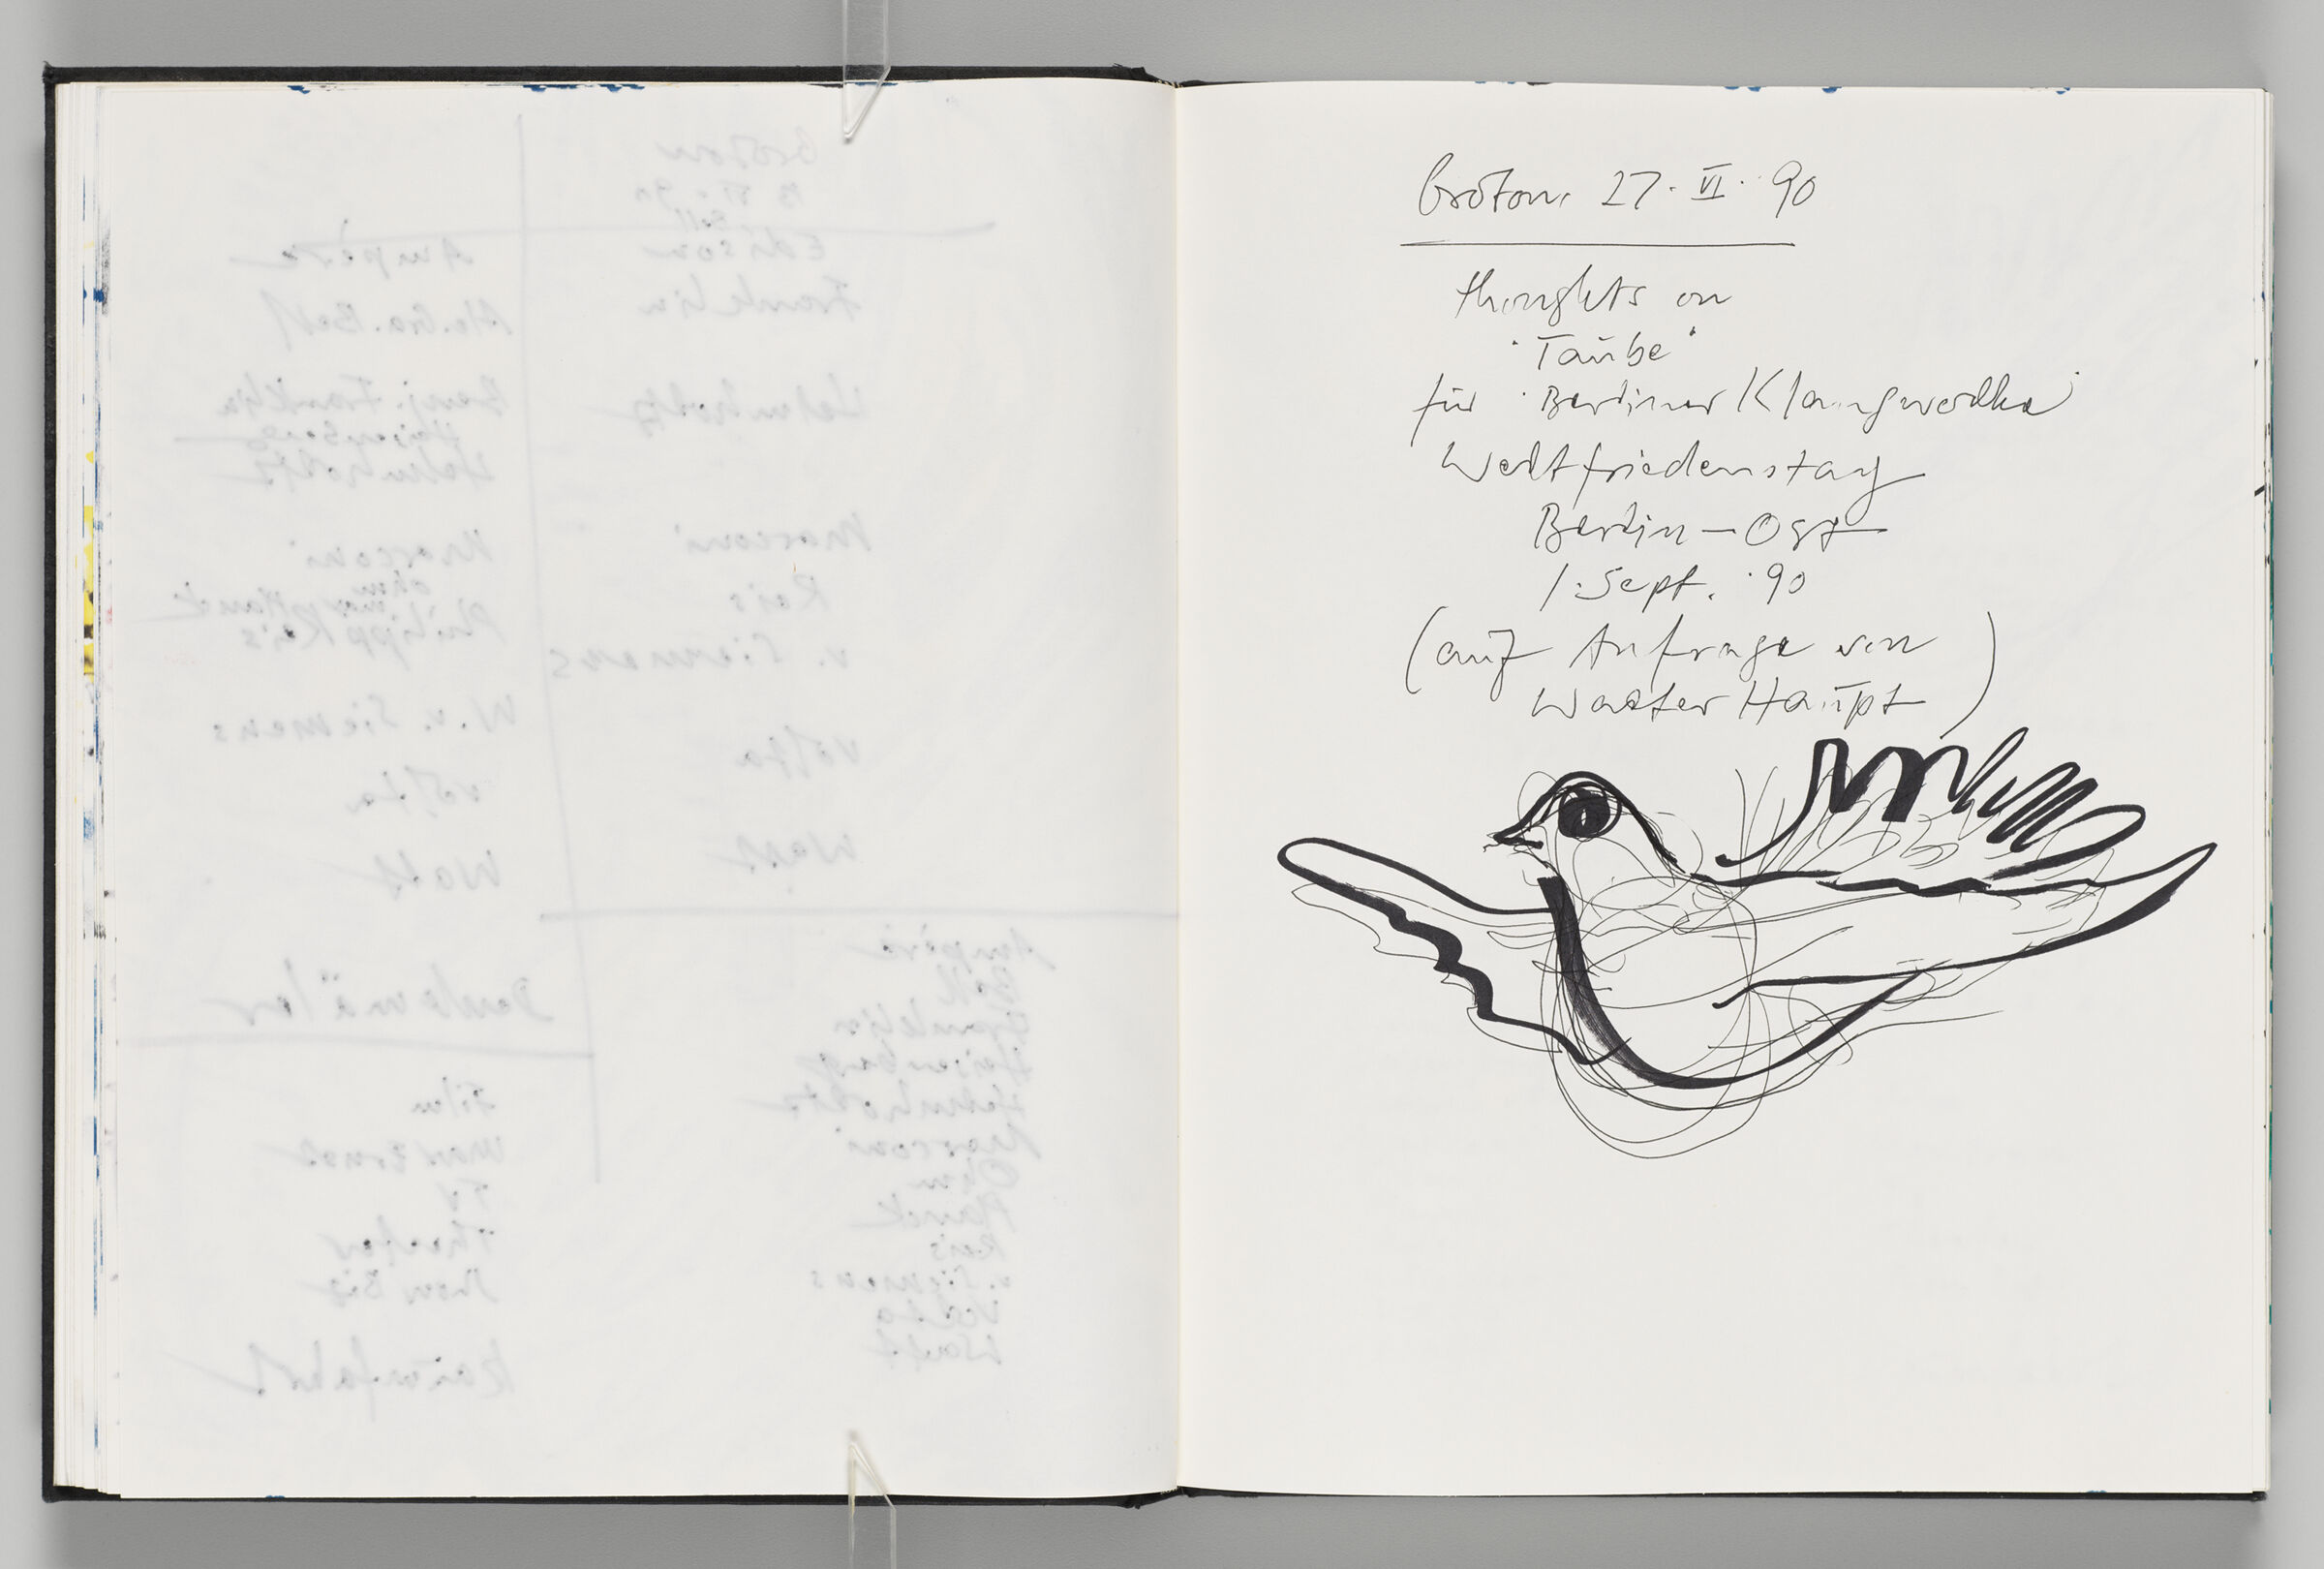 Untitled (Bleed-Through Of Previous Page, Left Page); Untitled (Notes With Dove Sketch, Right Page)